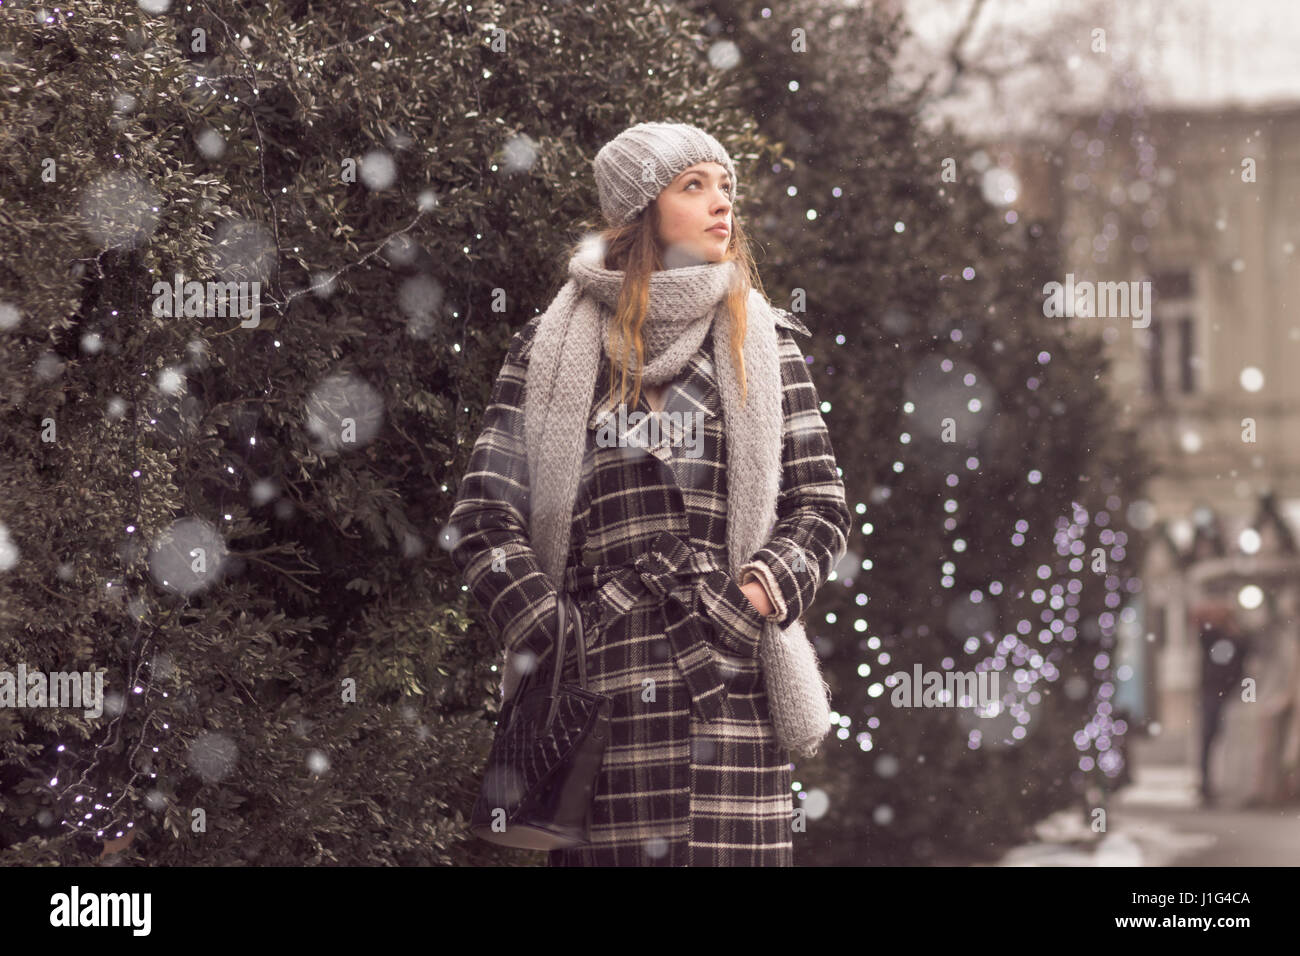 Winter Outdoor Fashion: Stunning Young Woman Image & Design ID 0000472383 